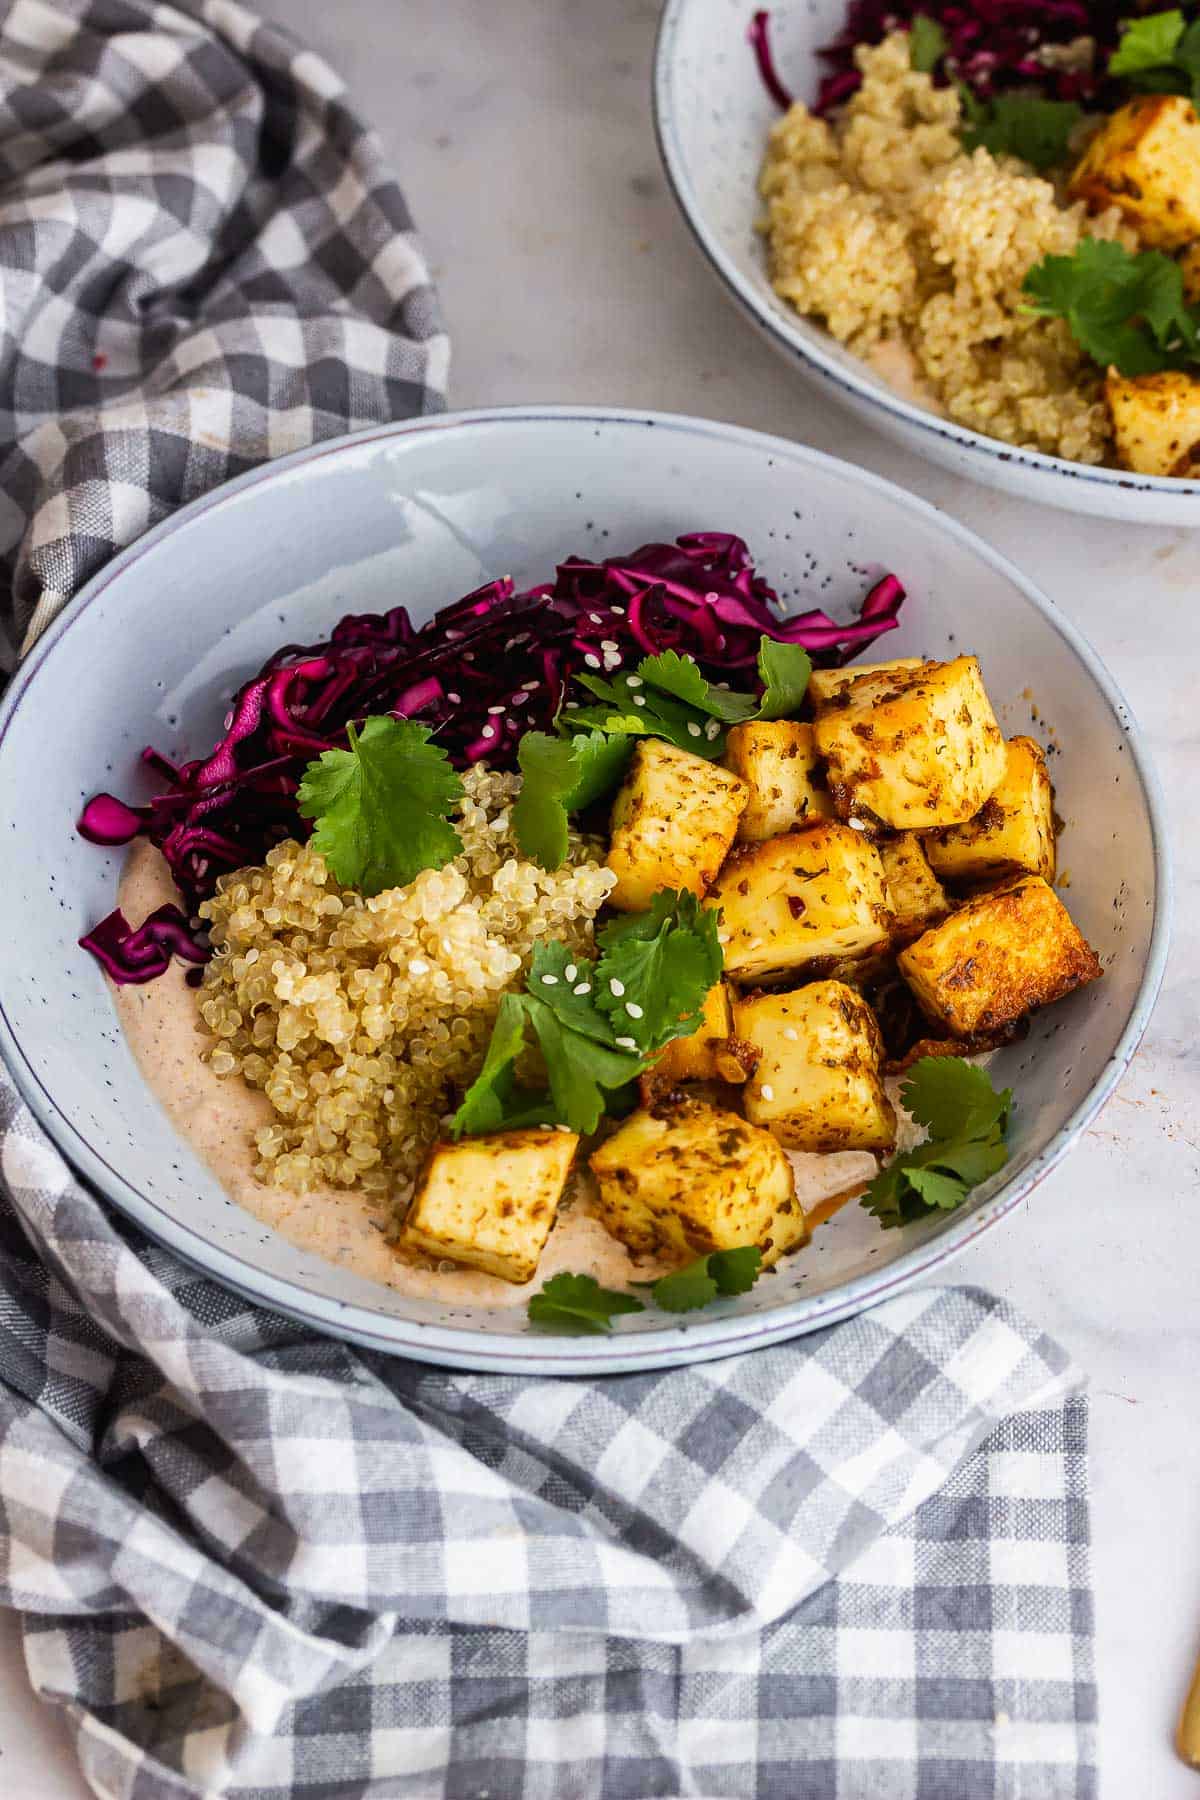 Blue bowl of paneer and quinoa on a checked cloth